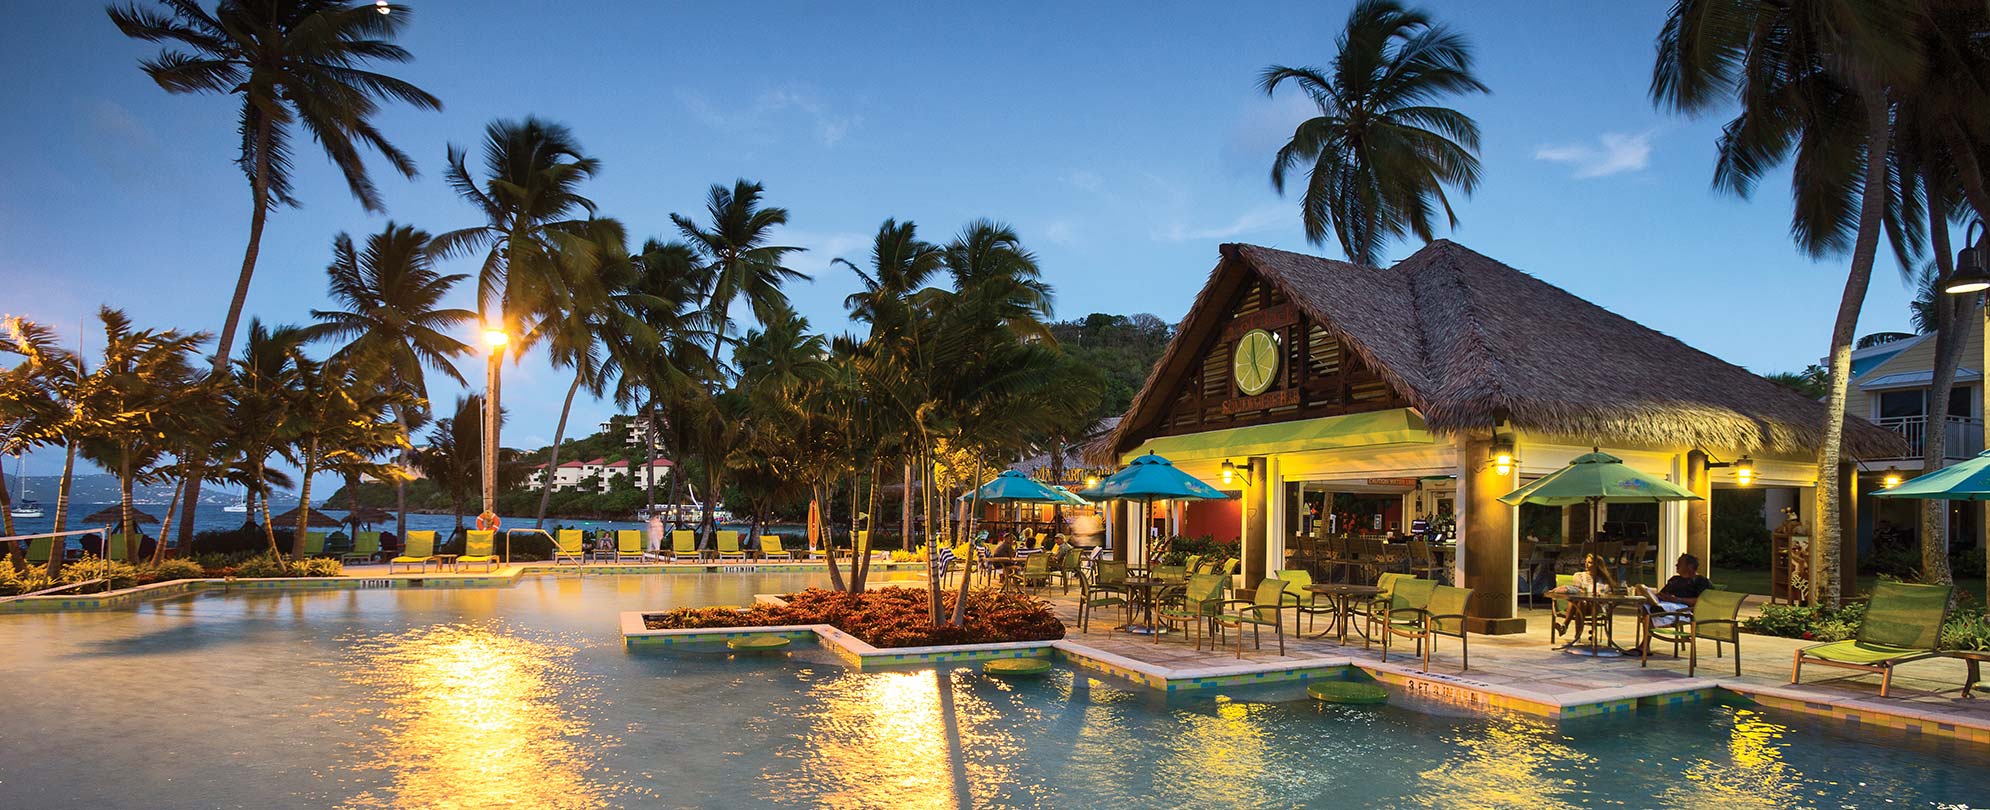 The oceanfront pool and tiki bar in the evening at Margaritaville Vacation Club by Wyndham - St. Thomas, a timeshare resort.